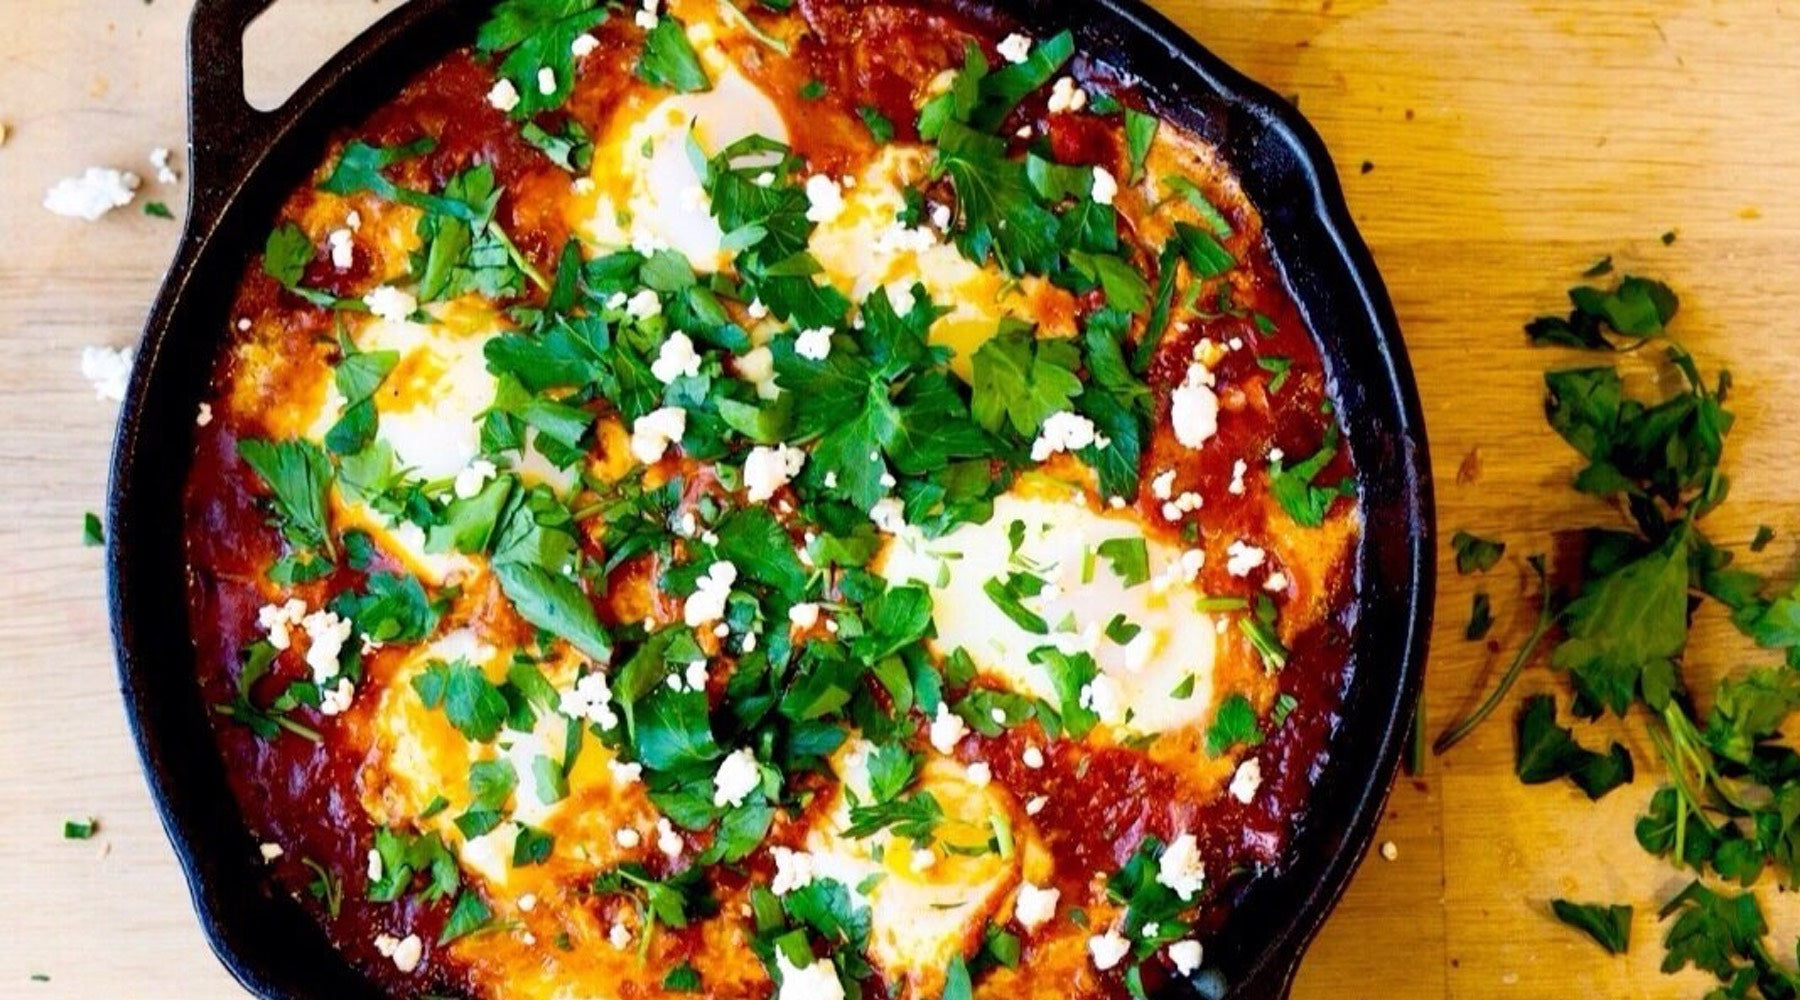 Classic Red Baked Eggs